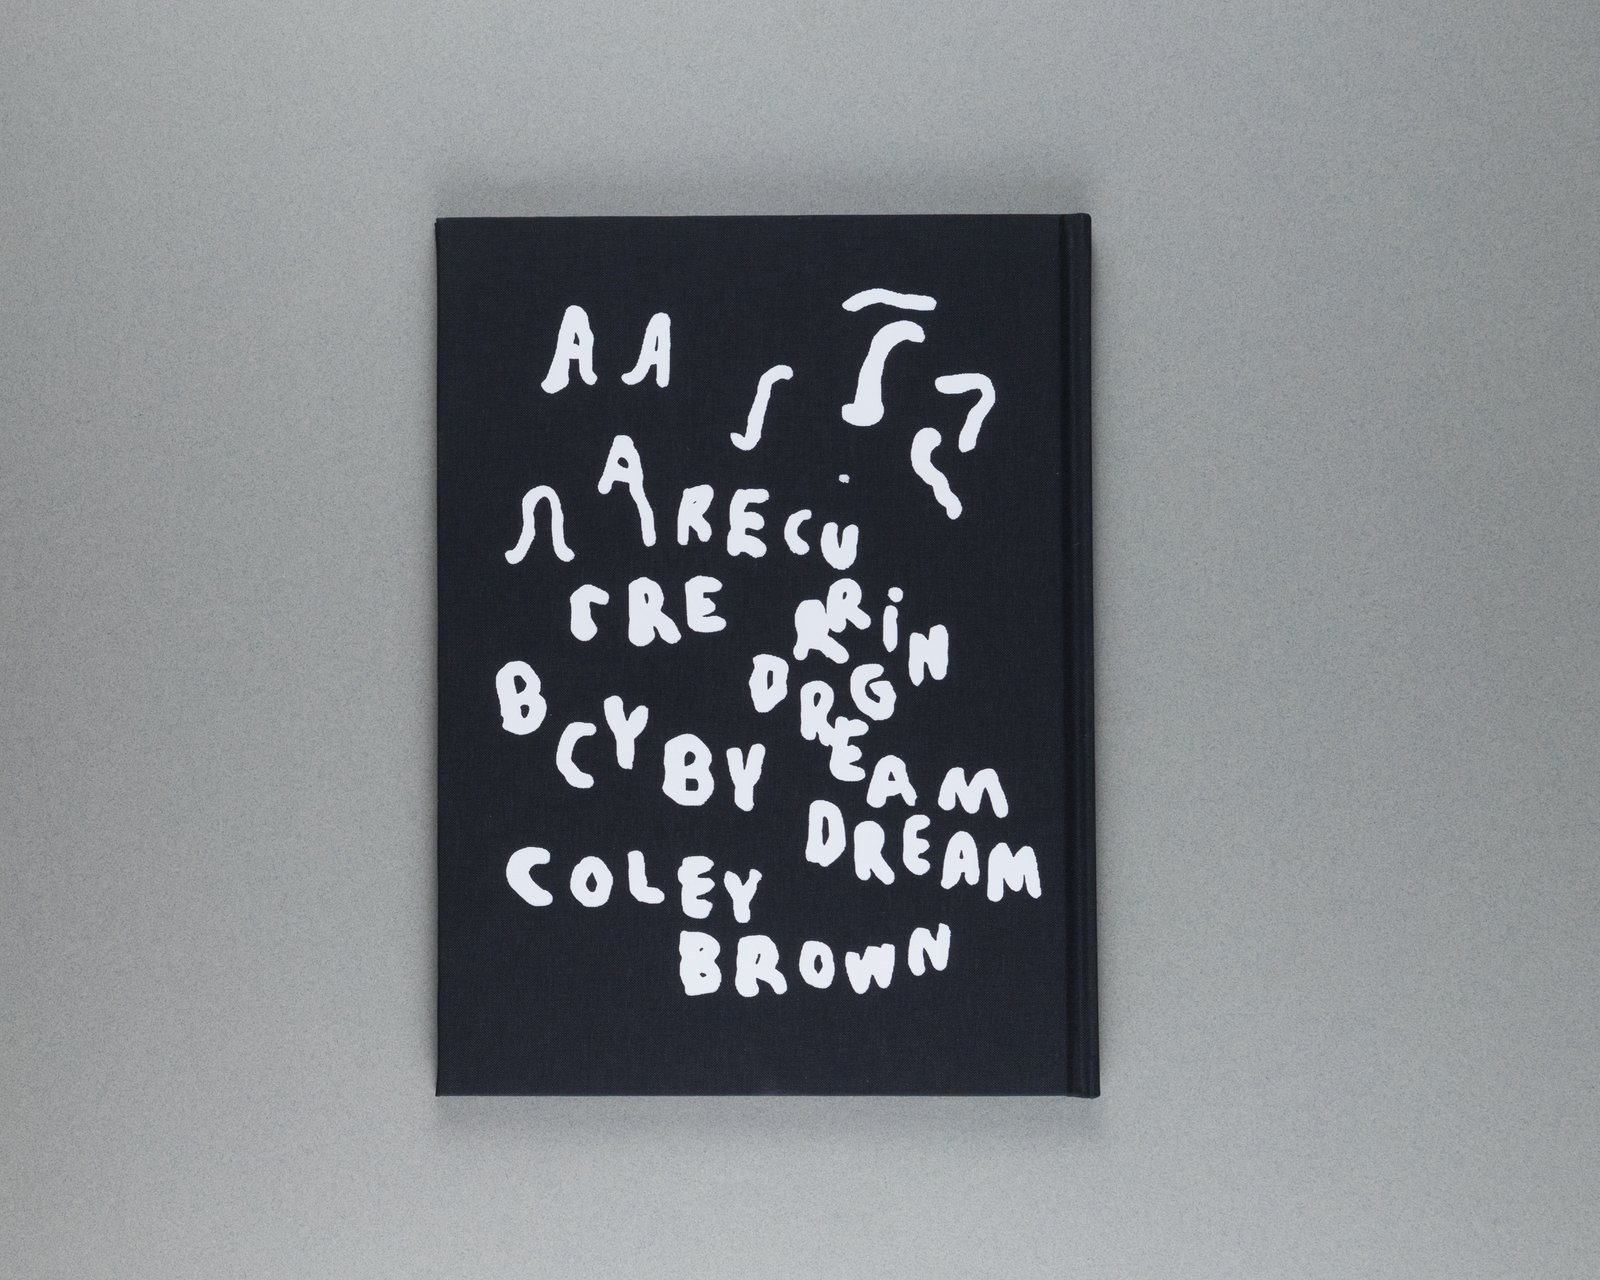 Coley Brown - A Recurring Dream